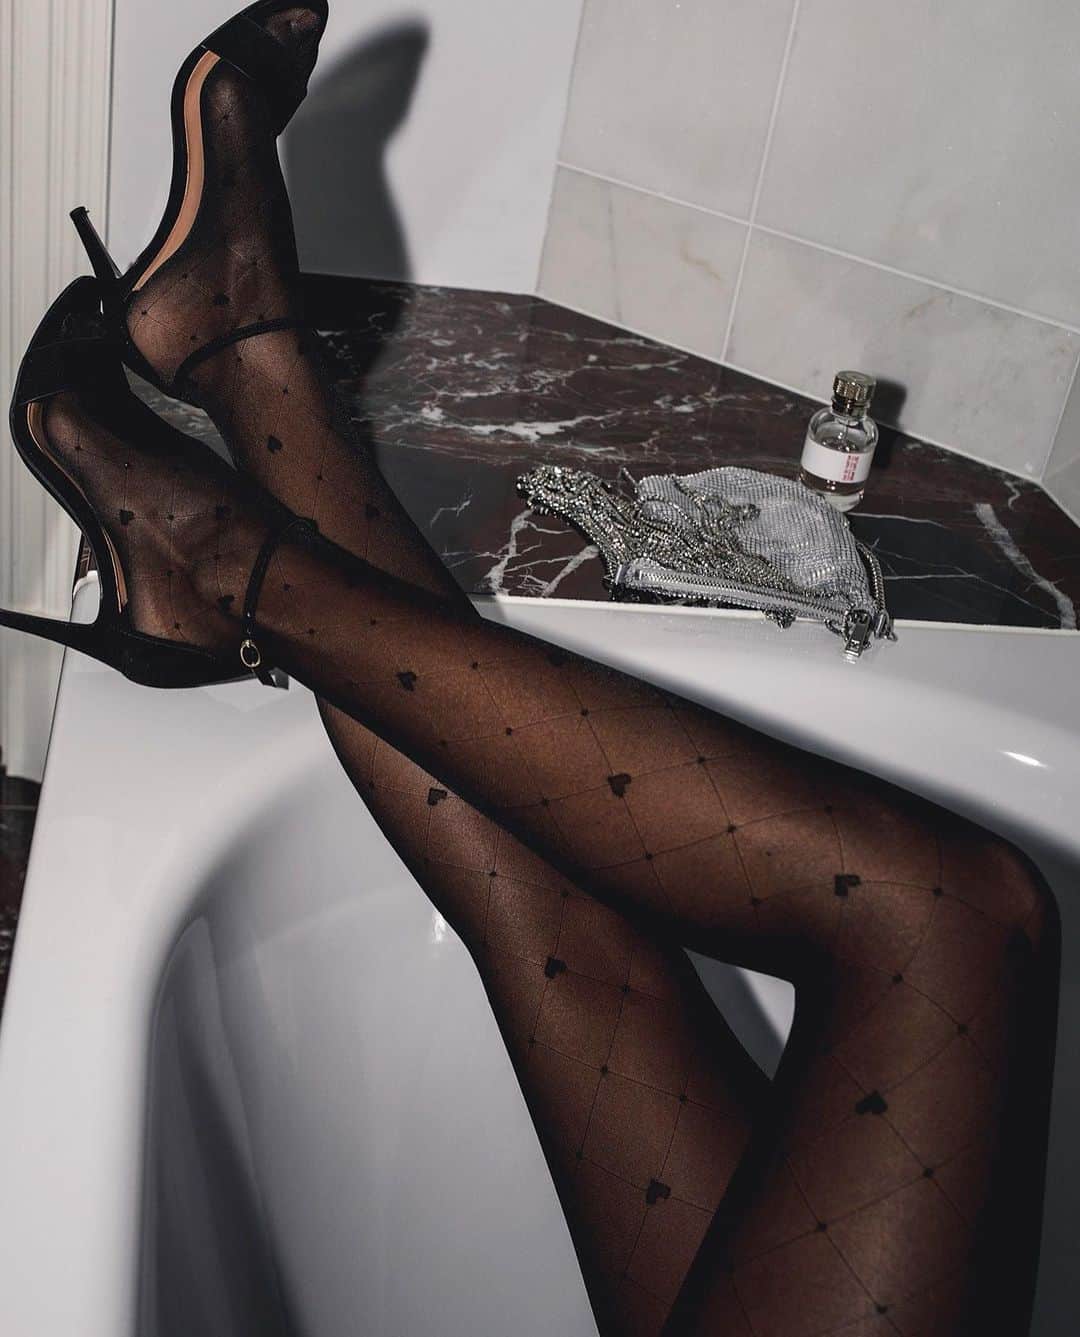 Calzedonia - Our timeless polka dots meets a shiny glitter effect! Try our  new Tights for your special occasions! #Calzedonia #ItalianLegwear  #CalzedoniaLovesYOU #valentine